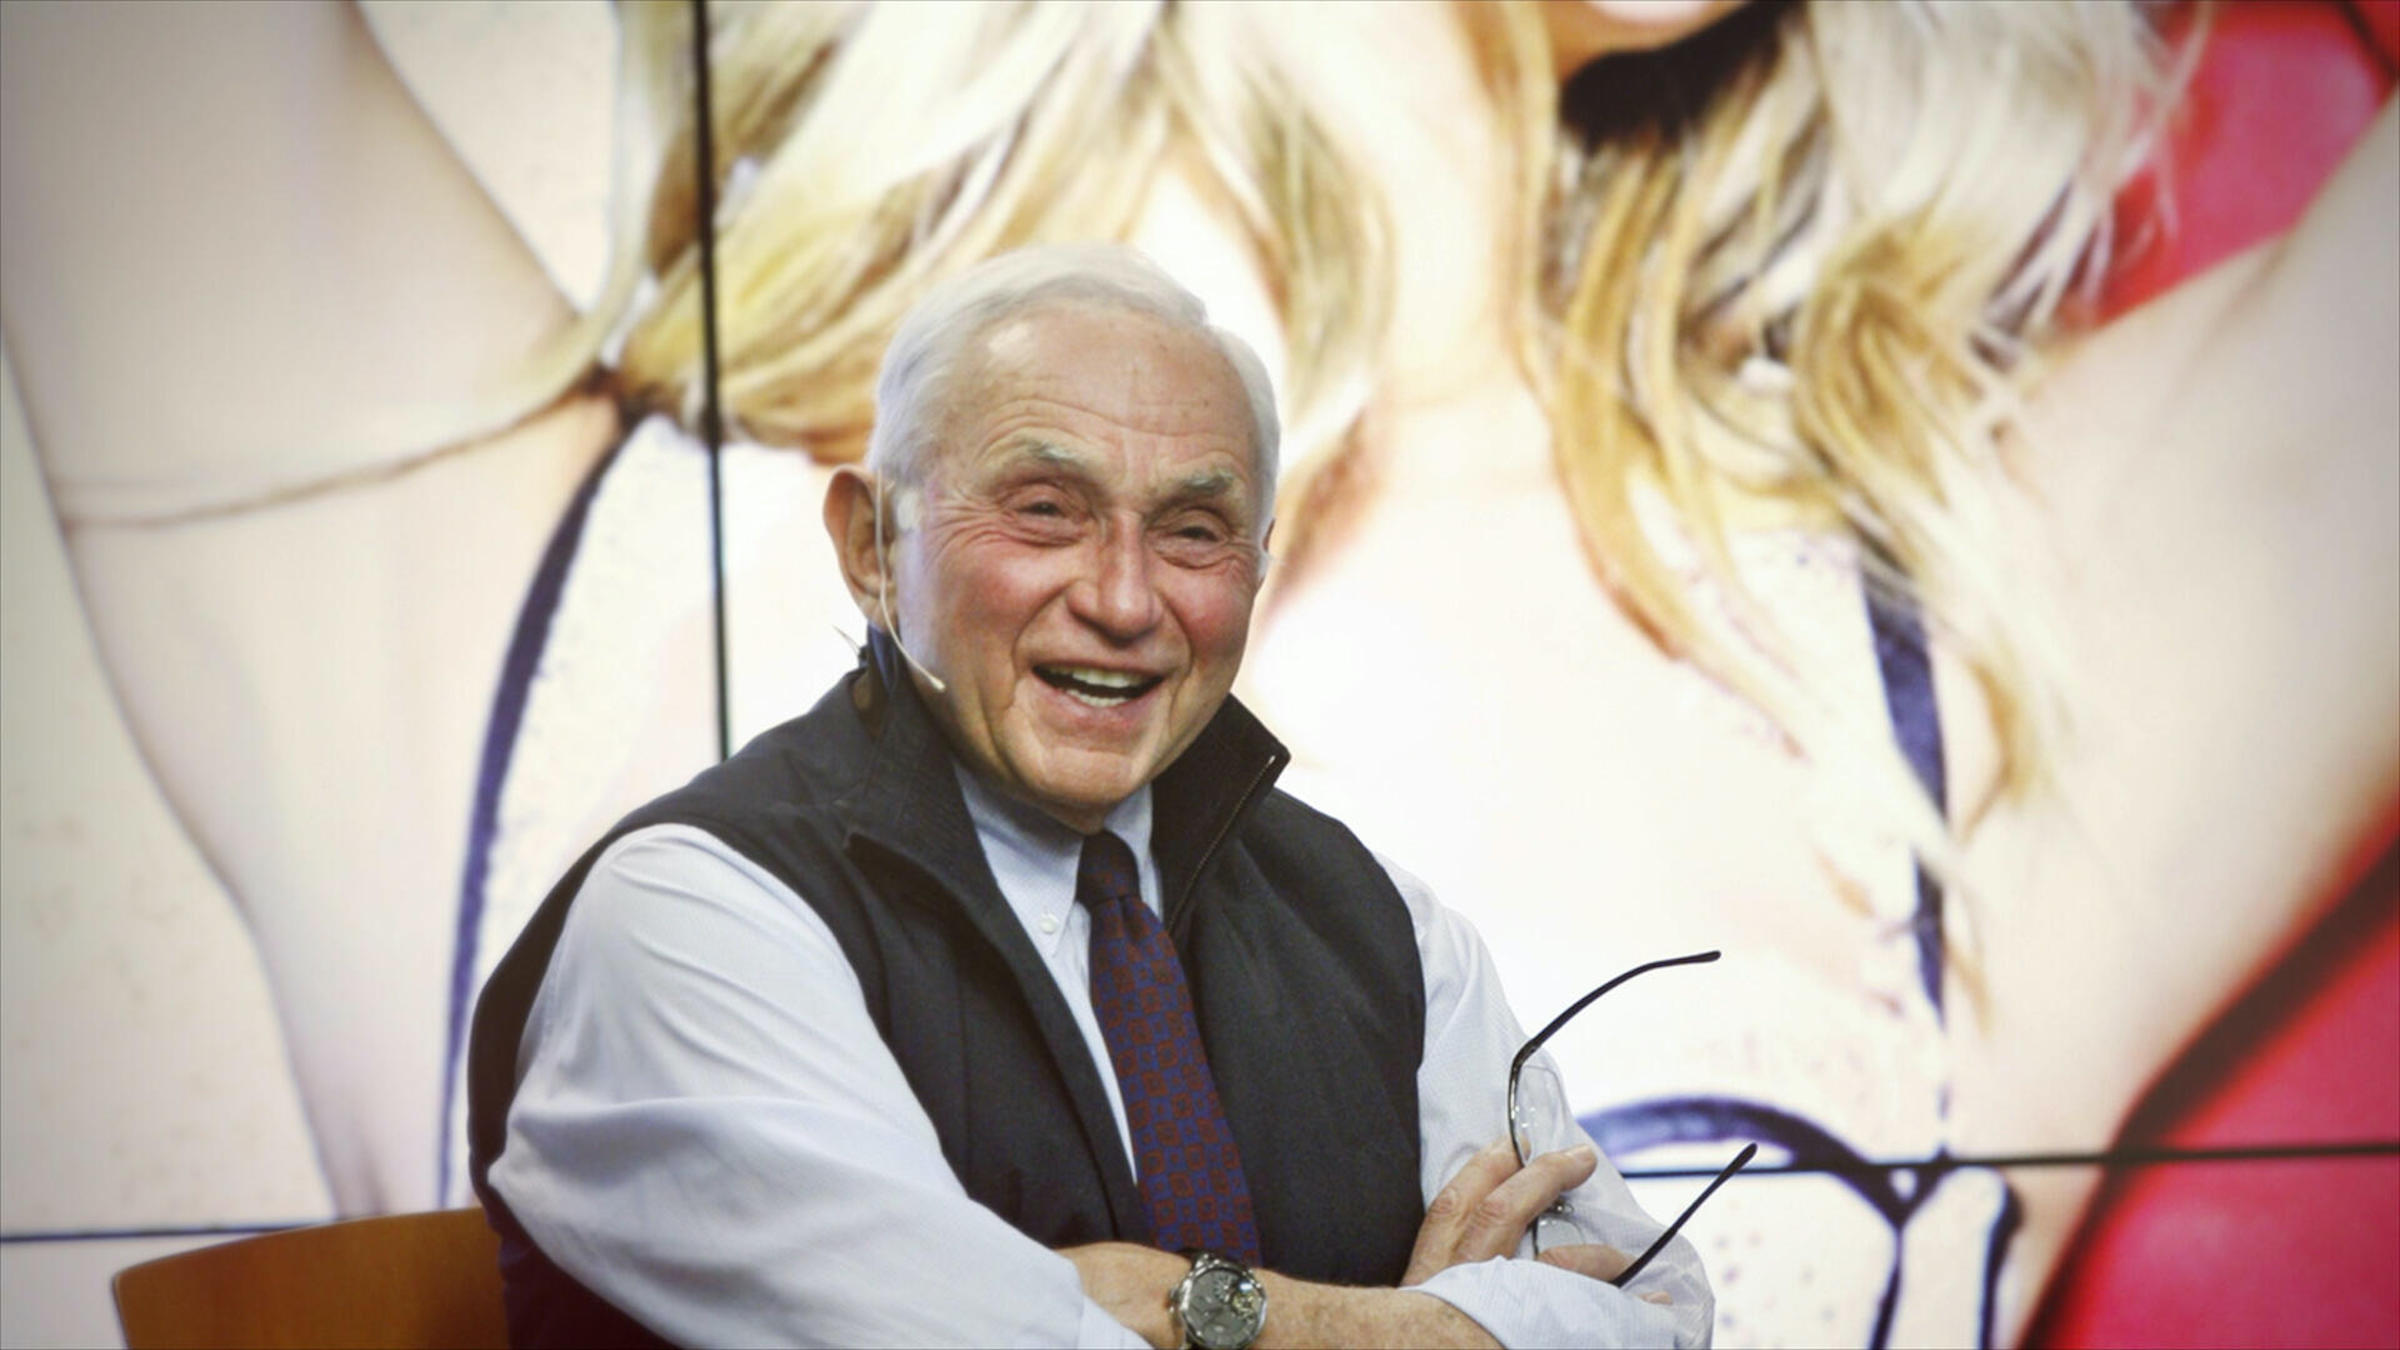 Longtime CEO Les Wexner (Courtesy of Hulu)